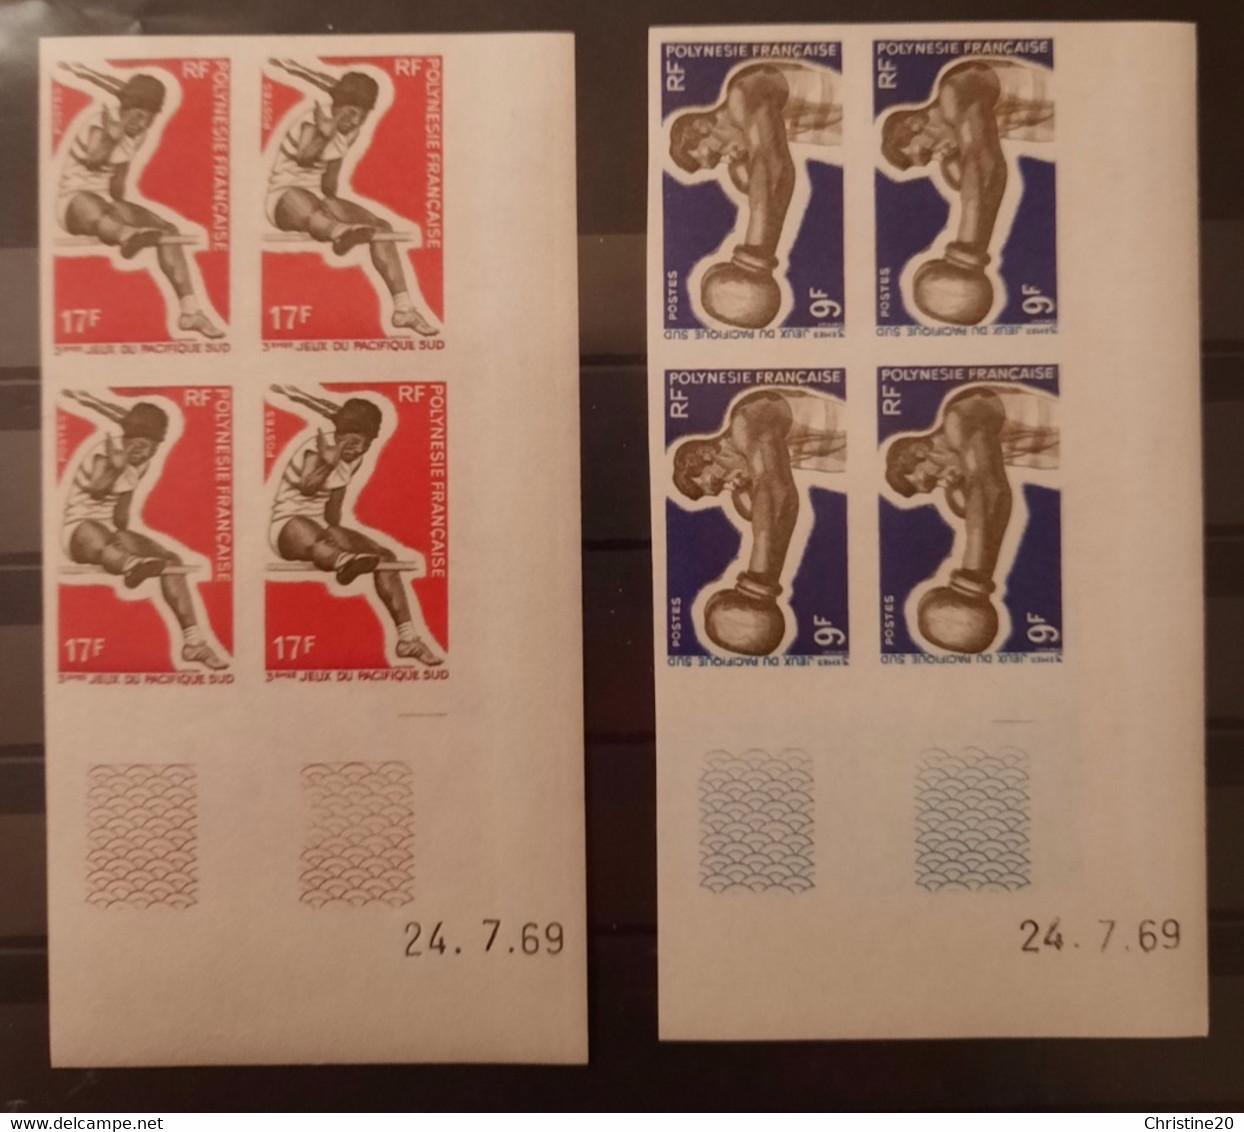 Polynésie Française/French Polynesia 1968 N°66/69 Bloc De 4 Nd CD **TB - Imperforates, Proofs & Errors